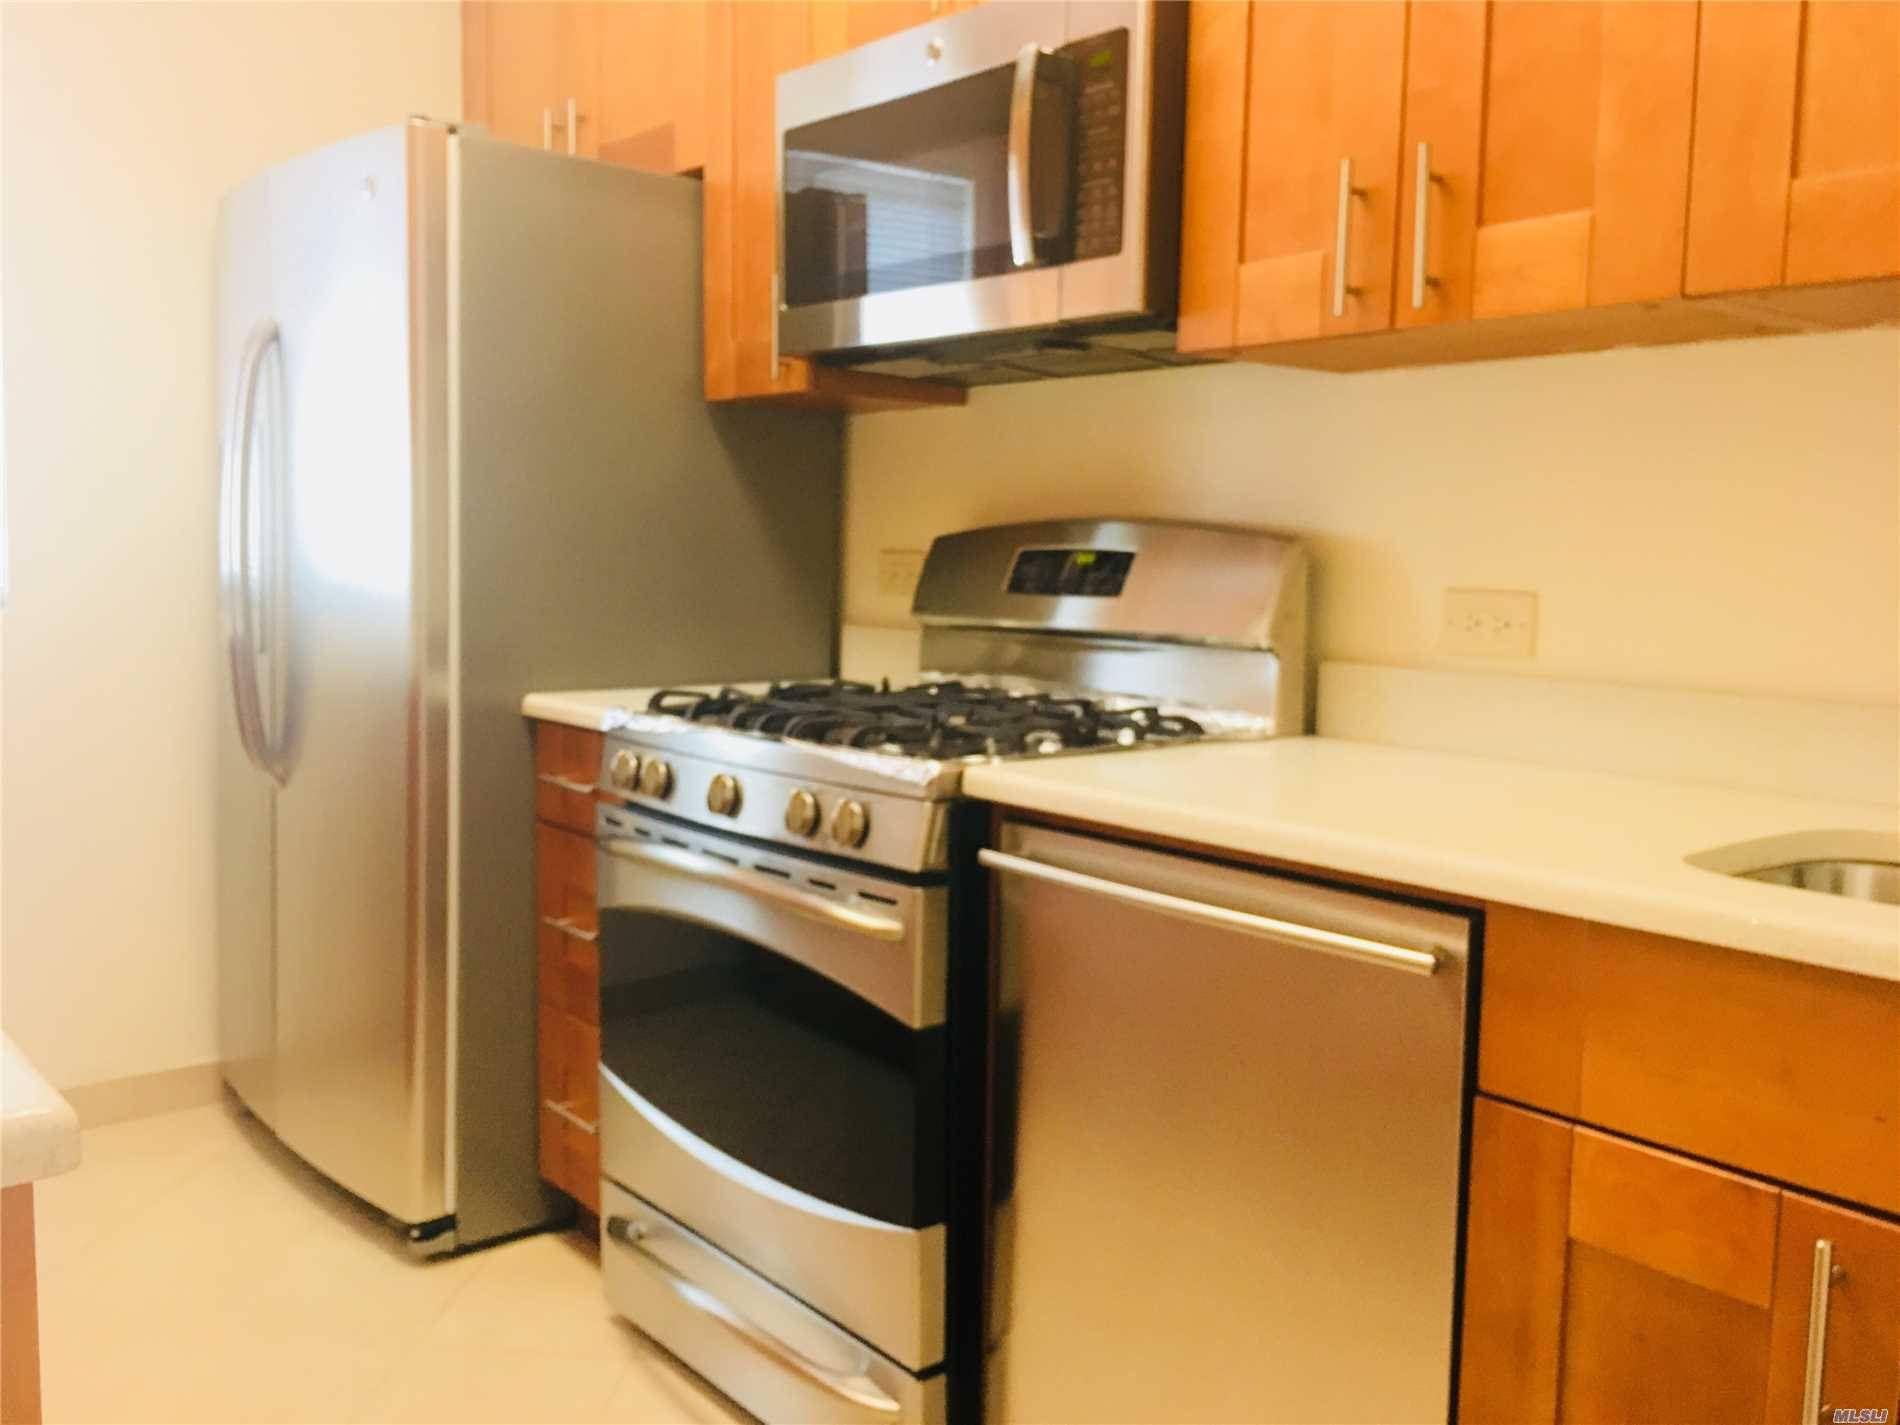 Newly Renovated 2 Bedroom Unit In Heart Of Sunnyside/Woodside.